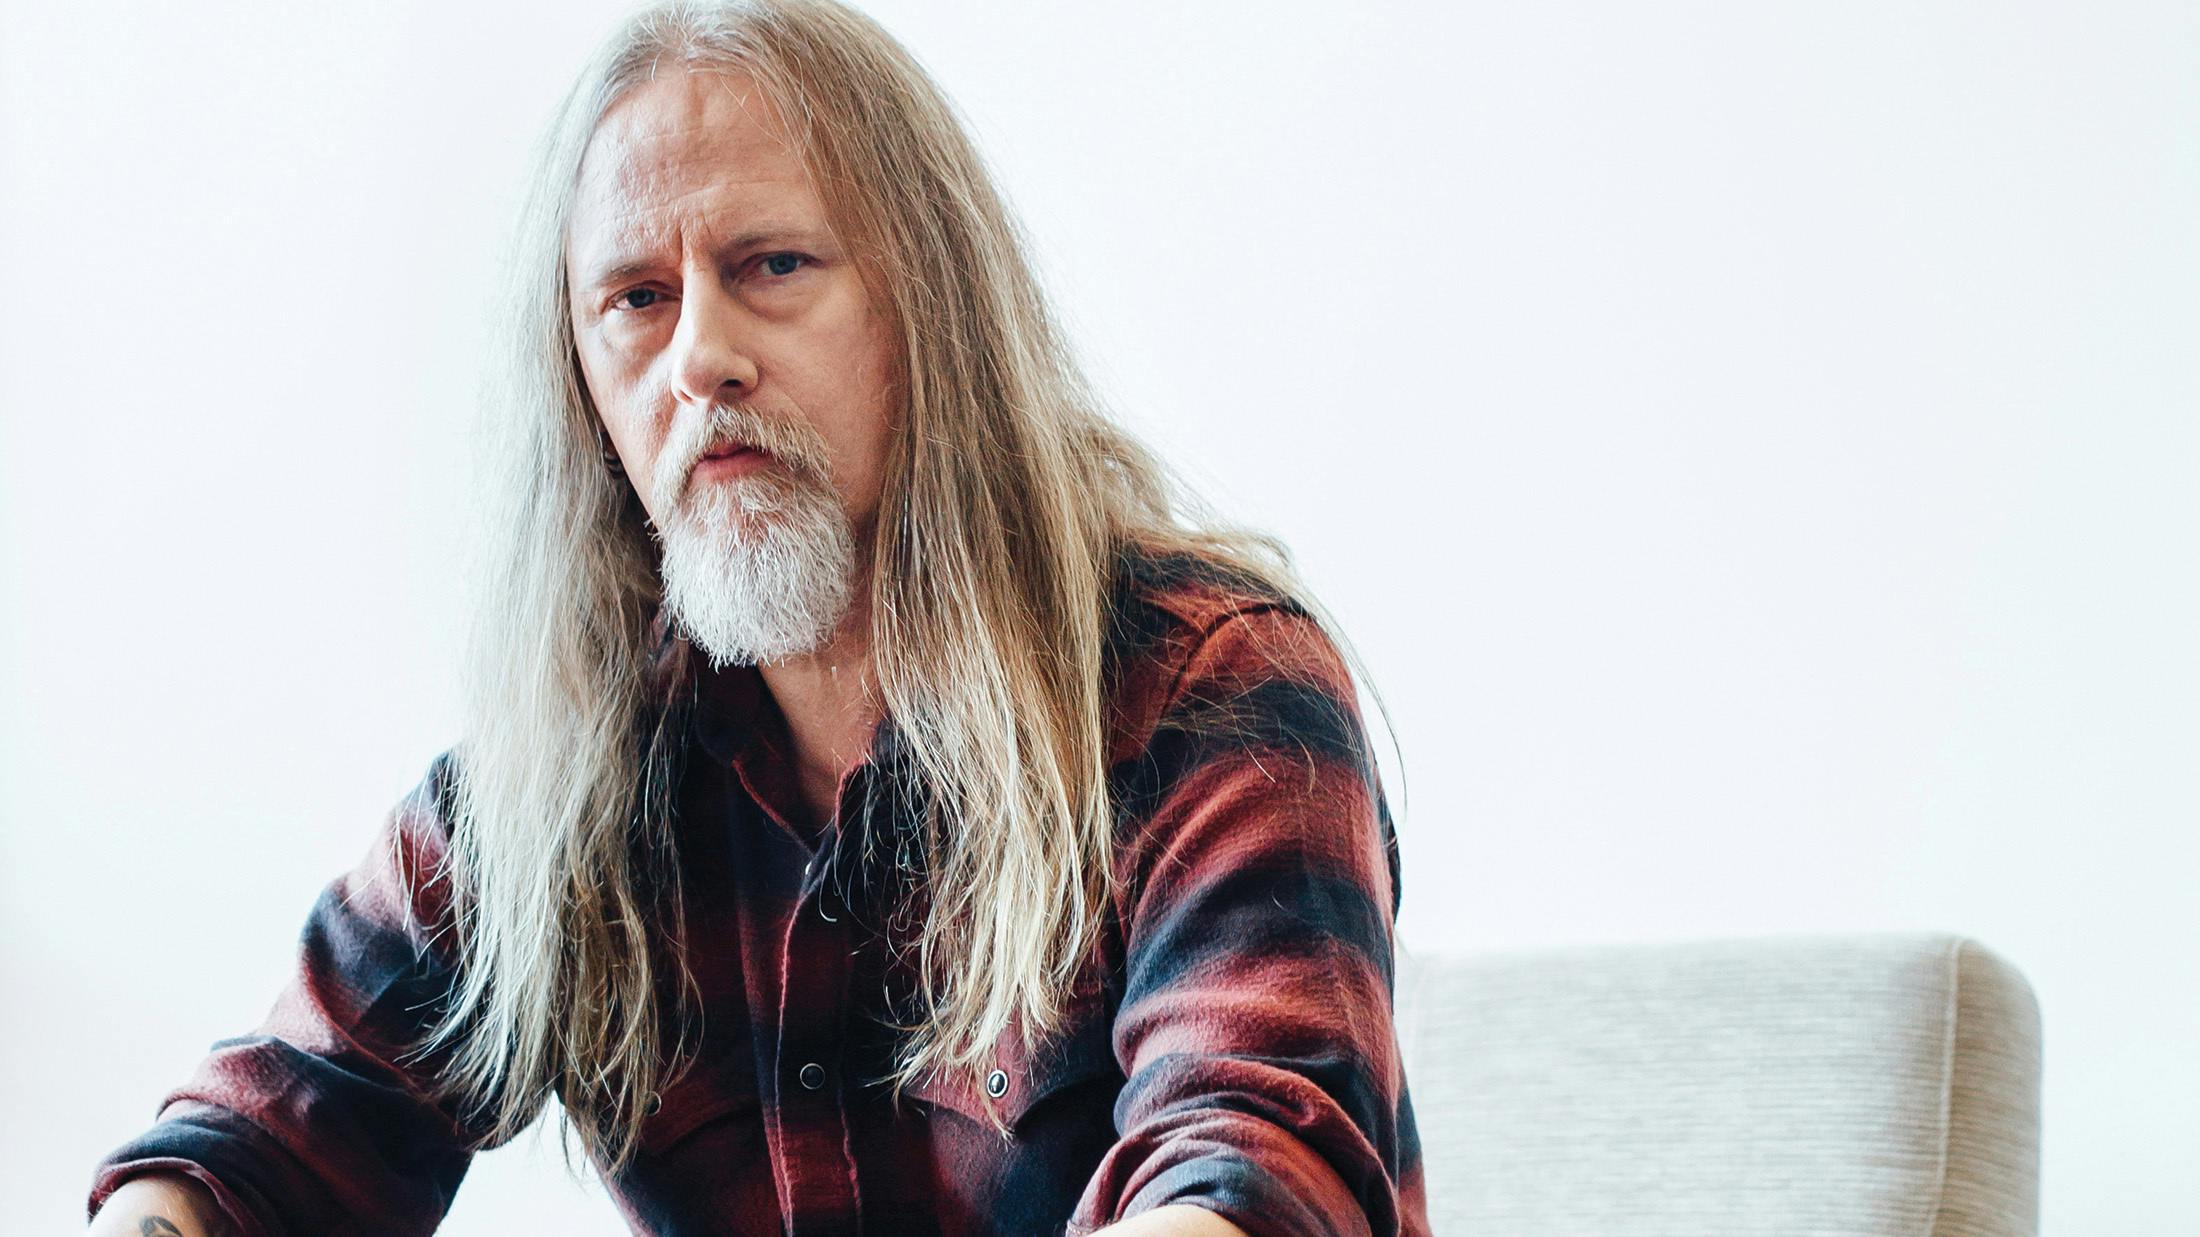 Jerry Cantrell: "I knew what being a rock star was from an early age, I knew it wasn't a safe path, but I've always been a gambler"